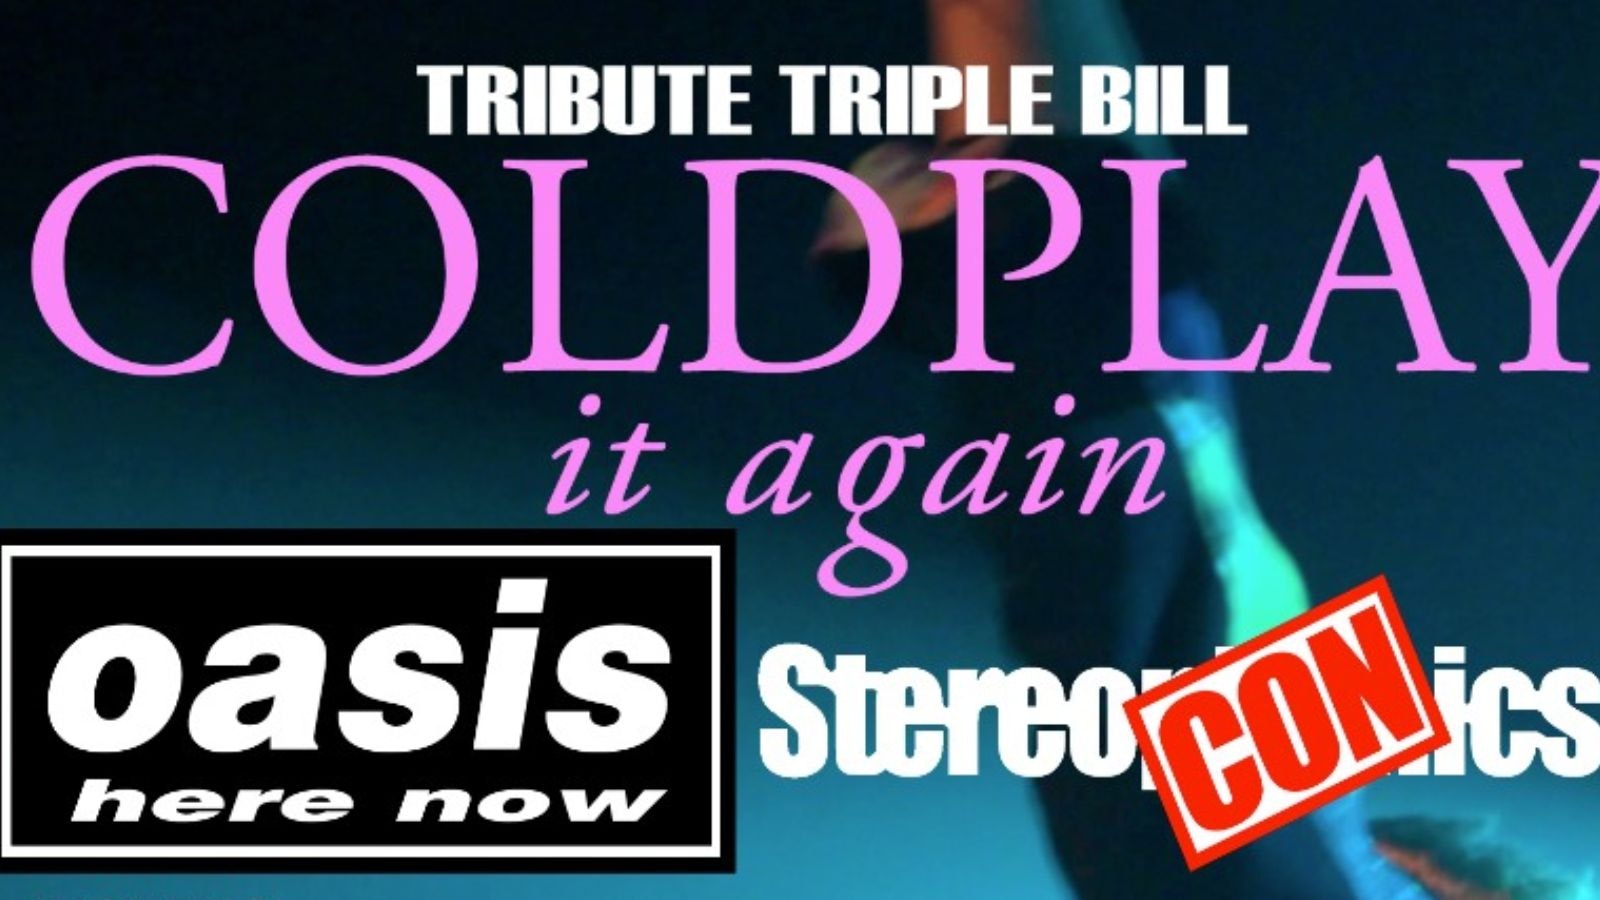 Coldplay It Again, Oasis Here Now & StereoCONics: TRIBUTE TRIPLE BILL